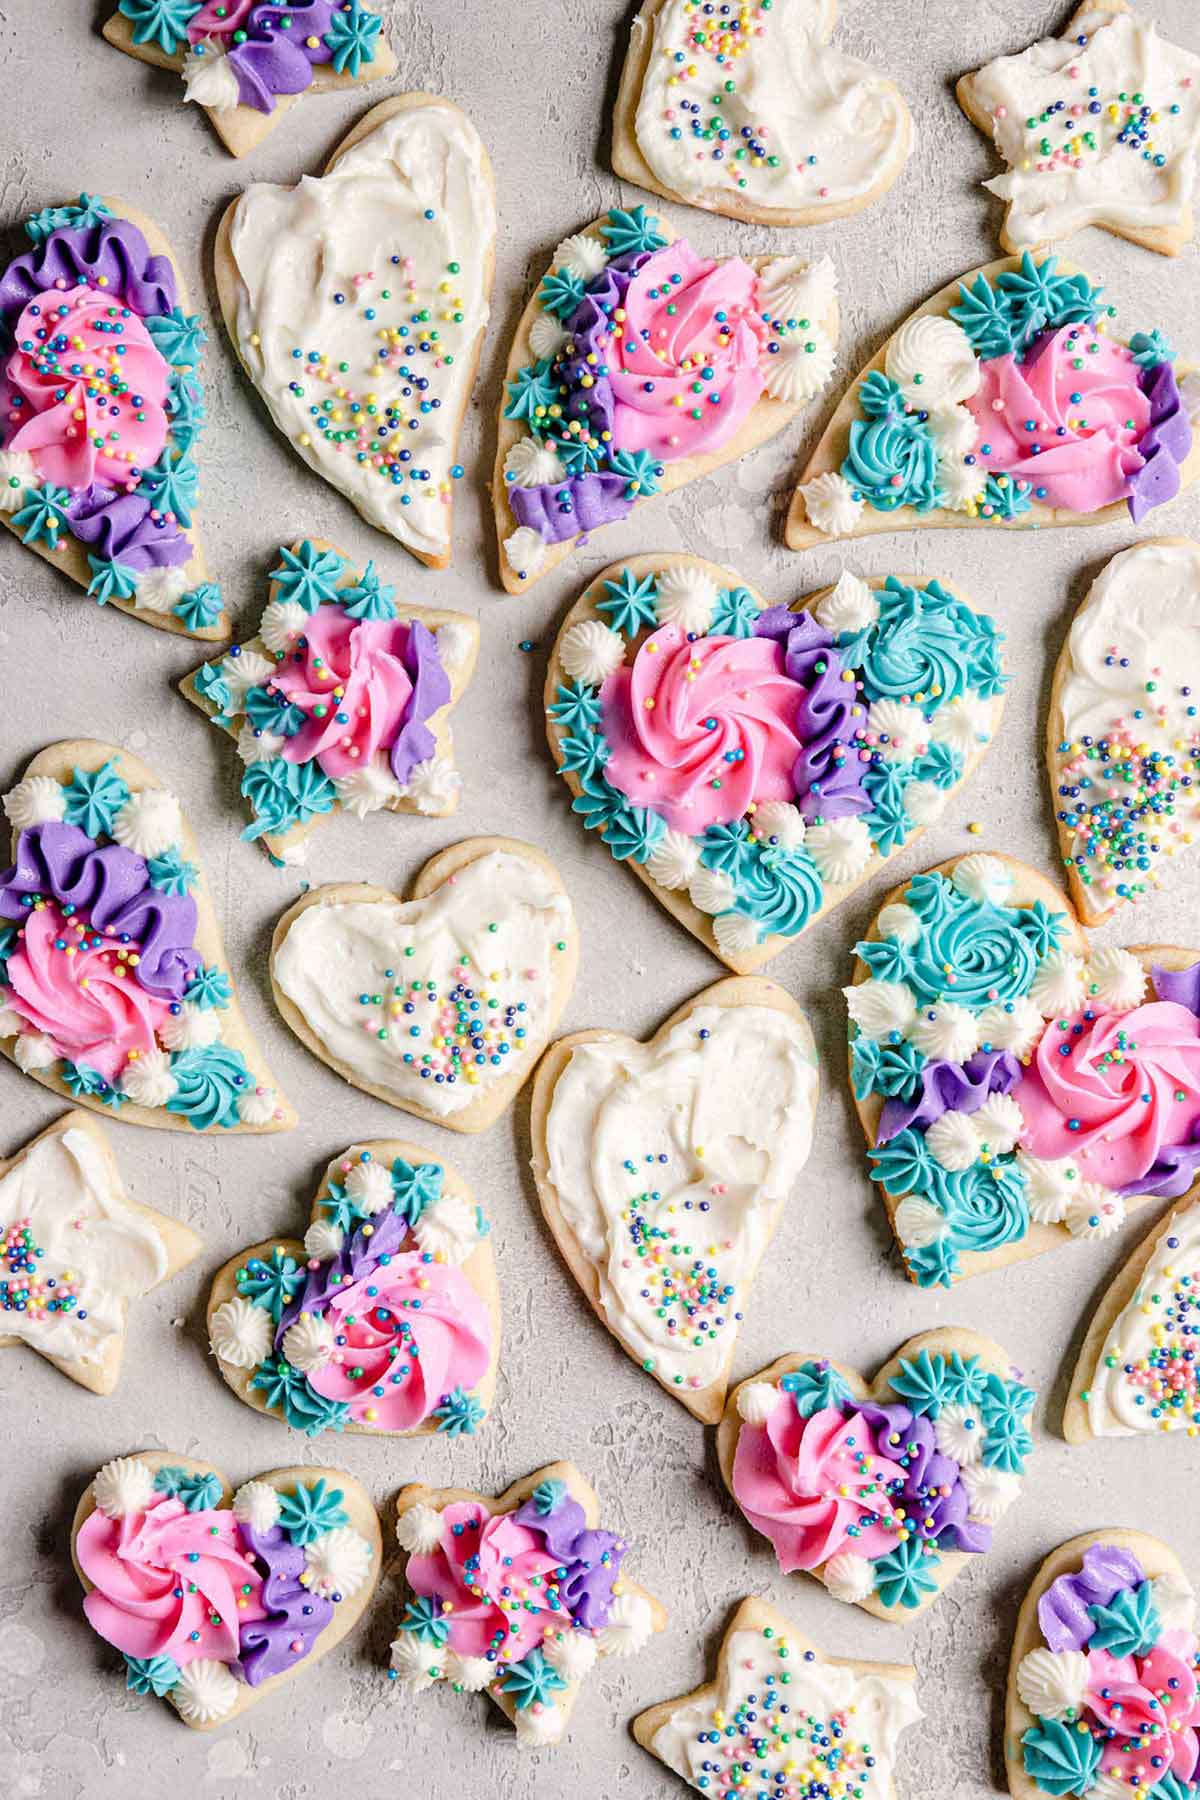 Cut-out sugar cookies in the shape of hearts and stars with buttercream frosting and sprinkles.